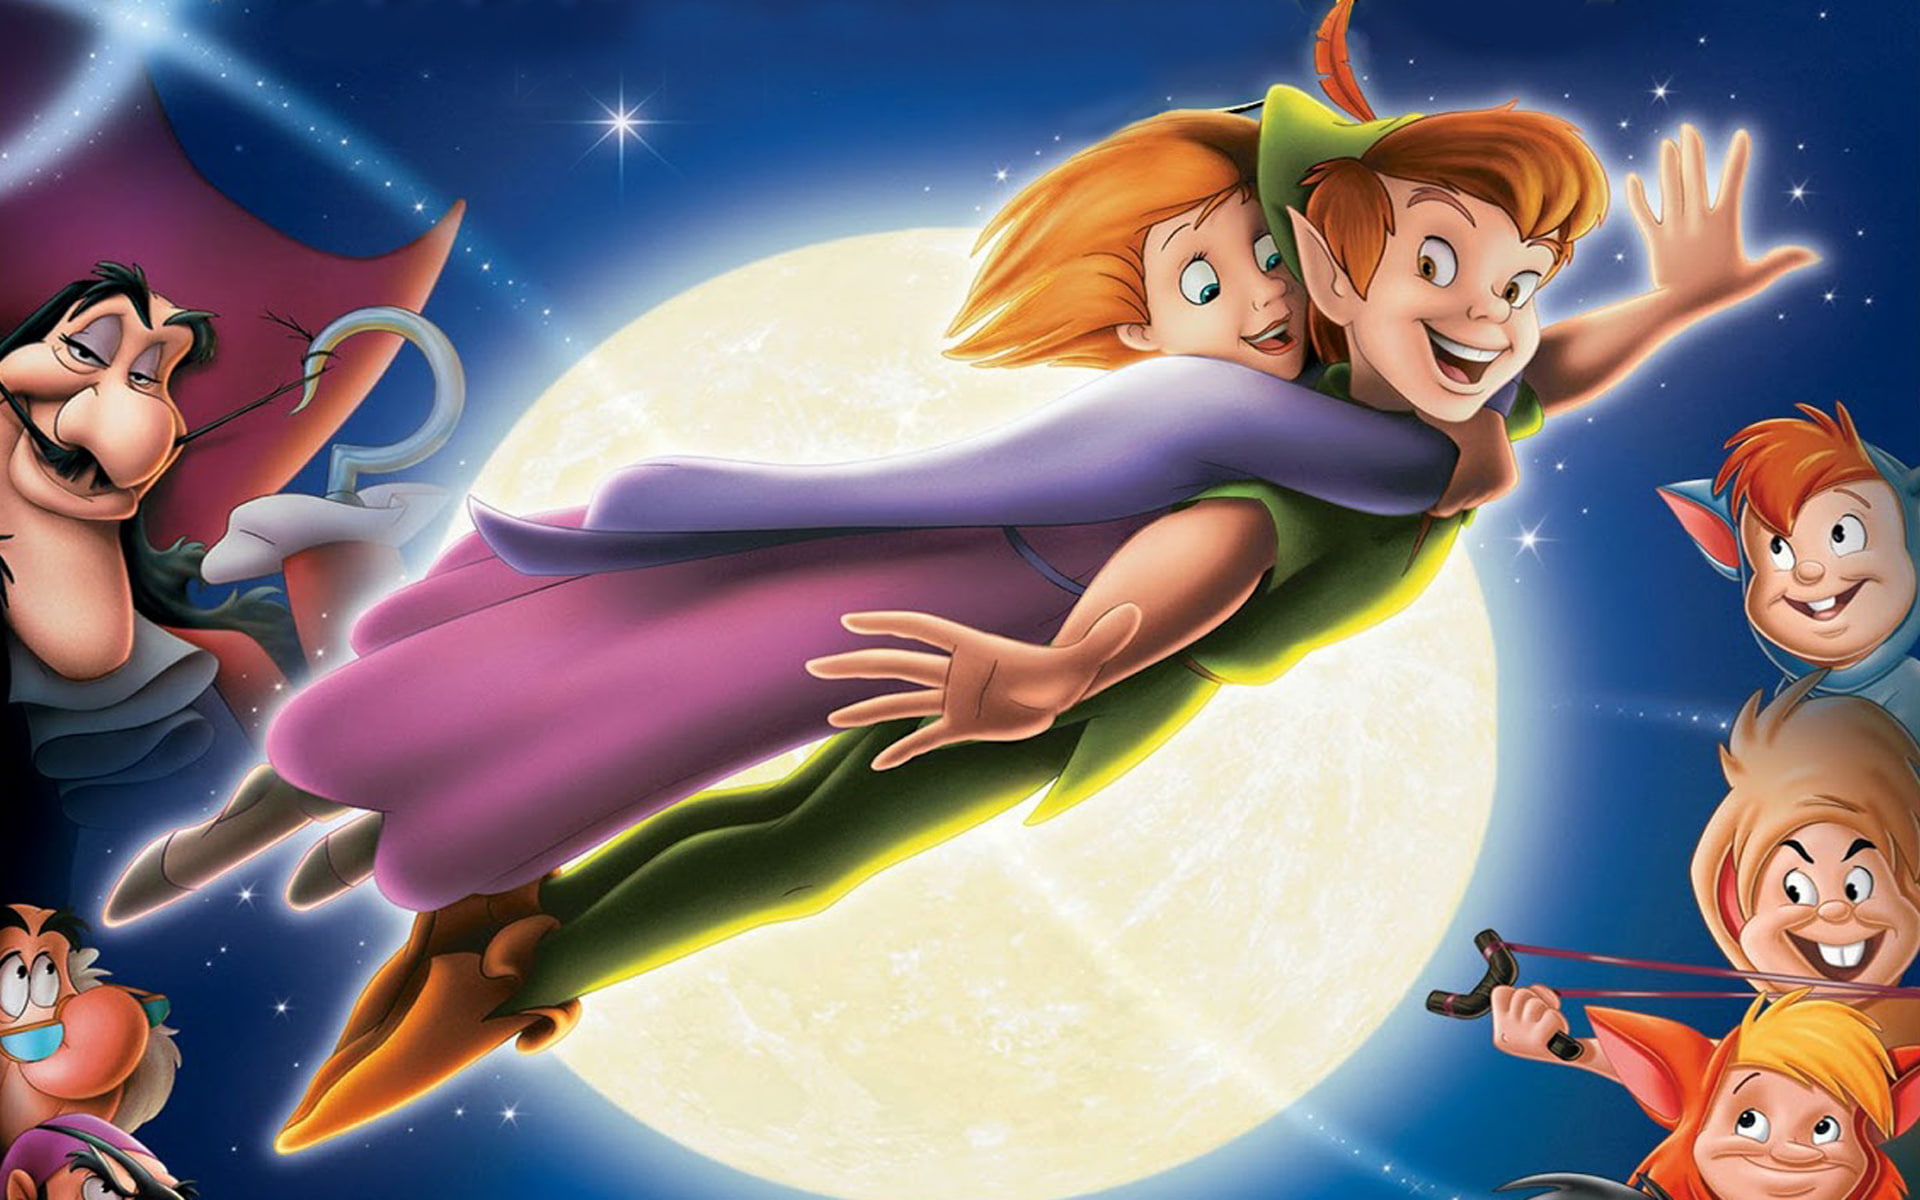 Return To Never Land Disney’s Cartoon Peter Pan And Jane Can Fly Desktop Wallpaper Hd For Your Computer 1920×1200